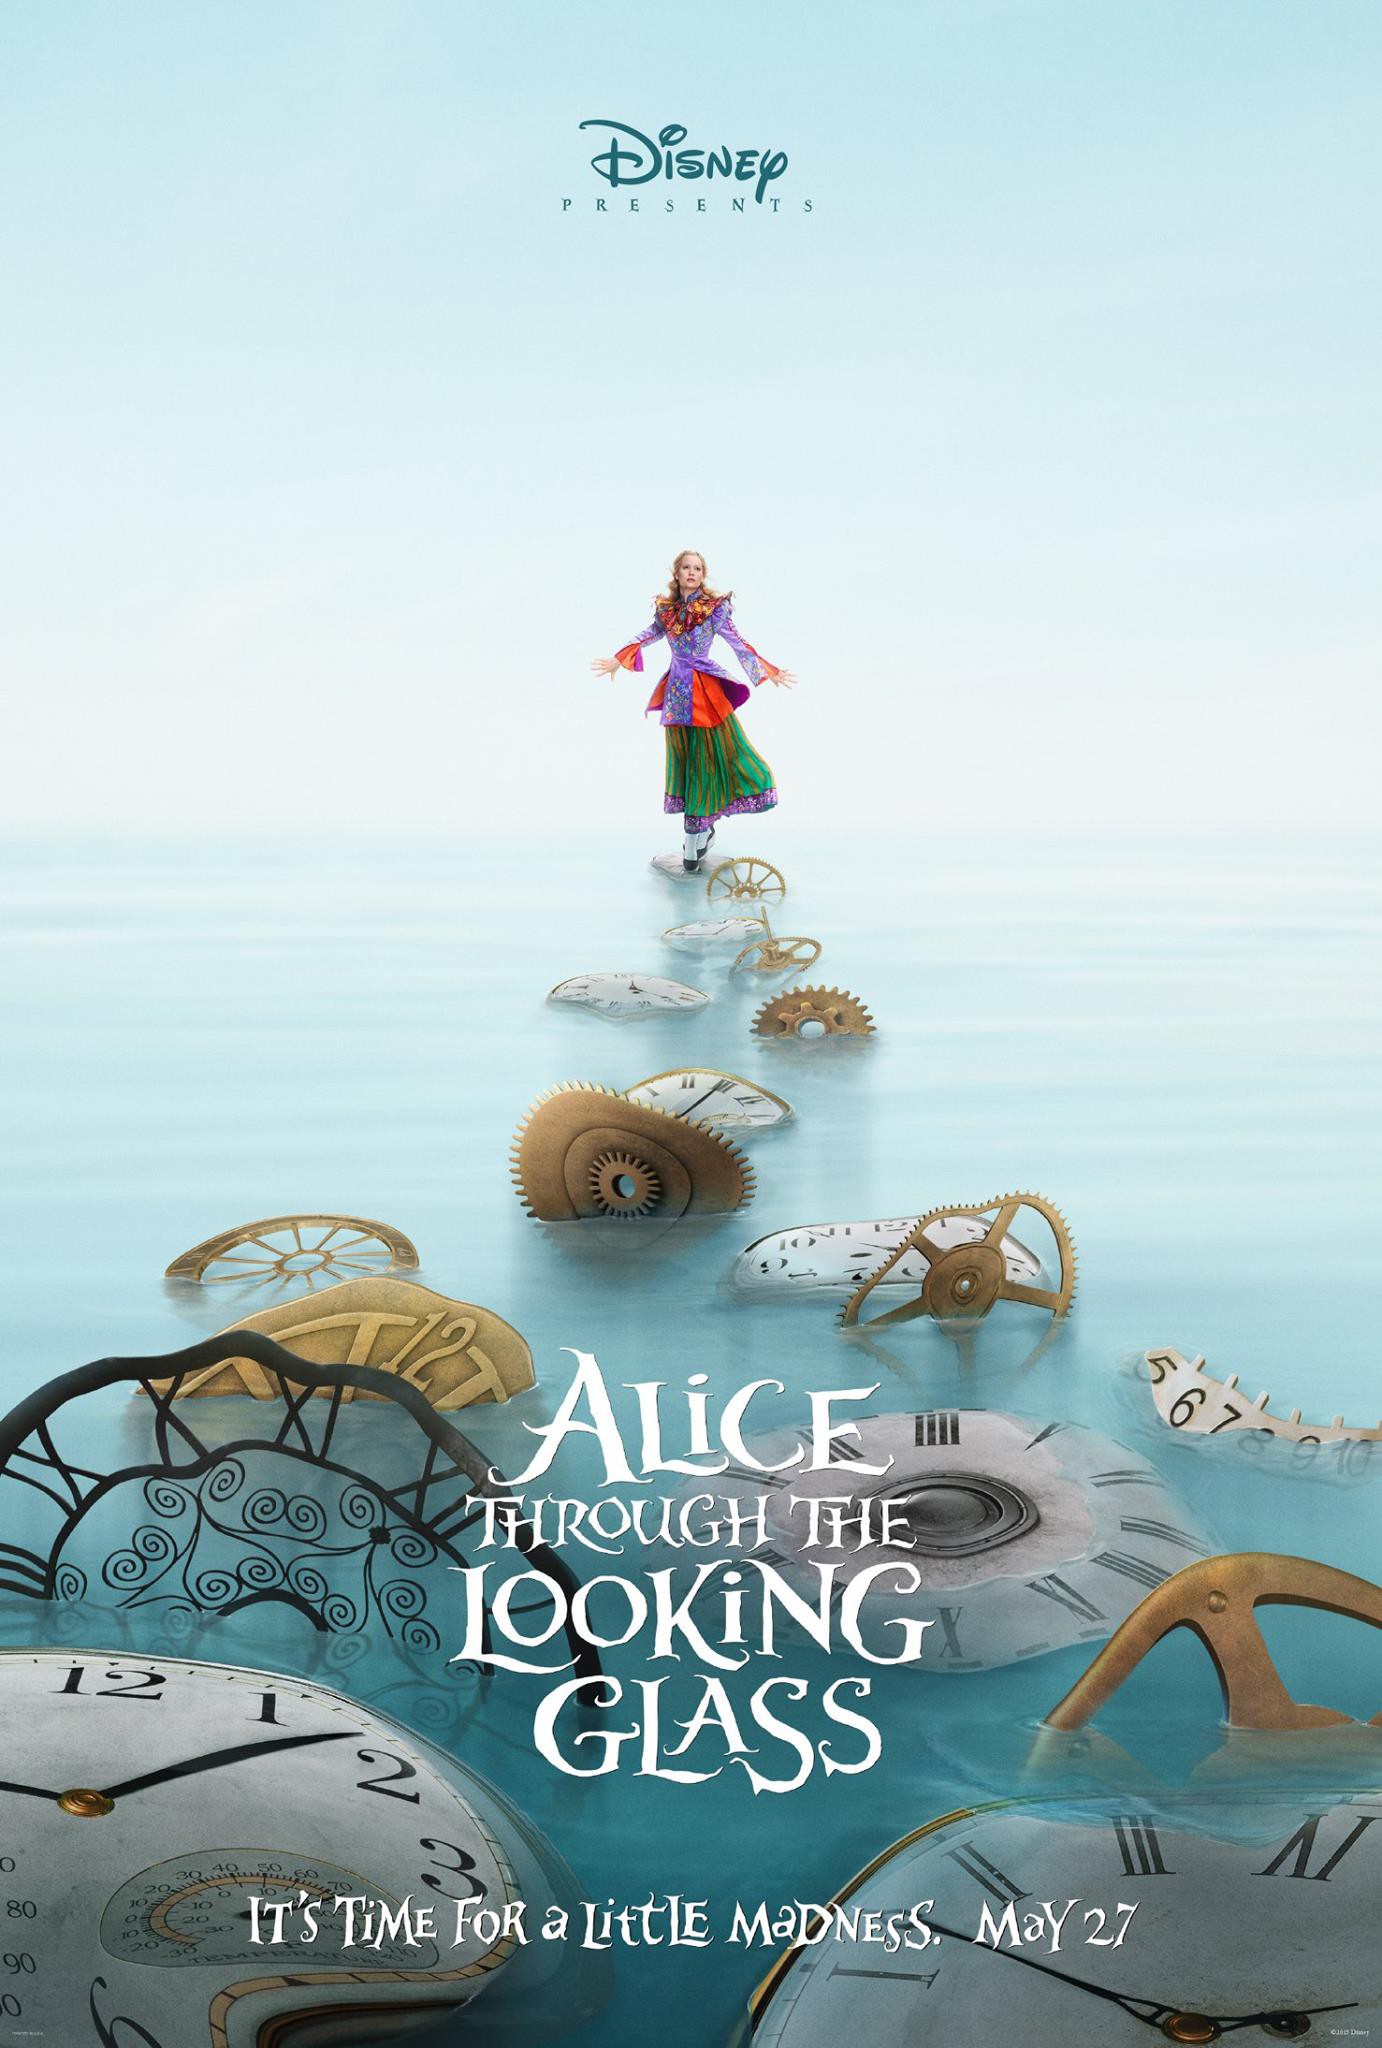 alice-through-the-looking-glass-posters-and-plot-details.jpg